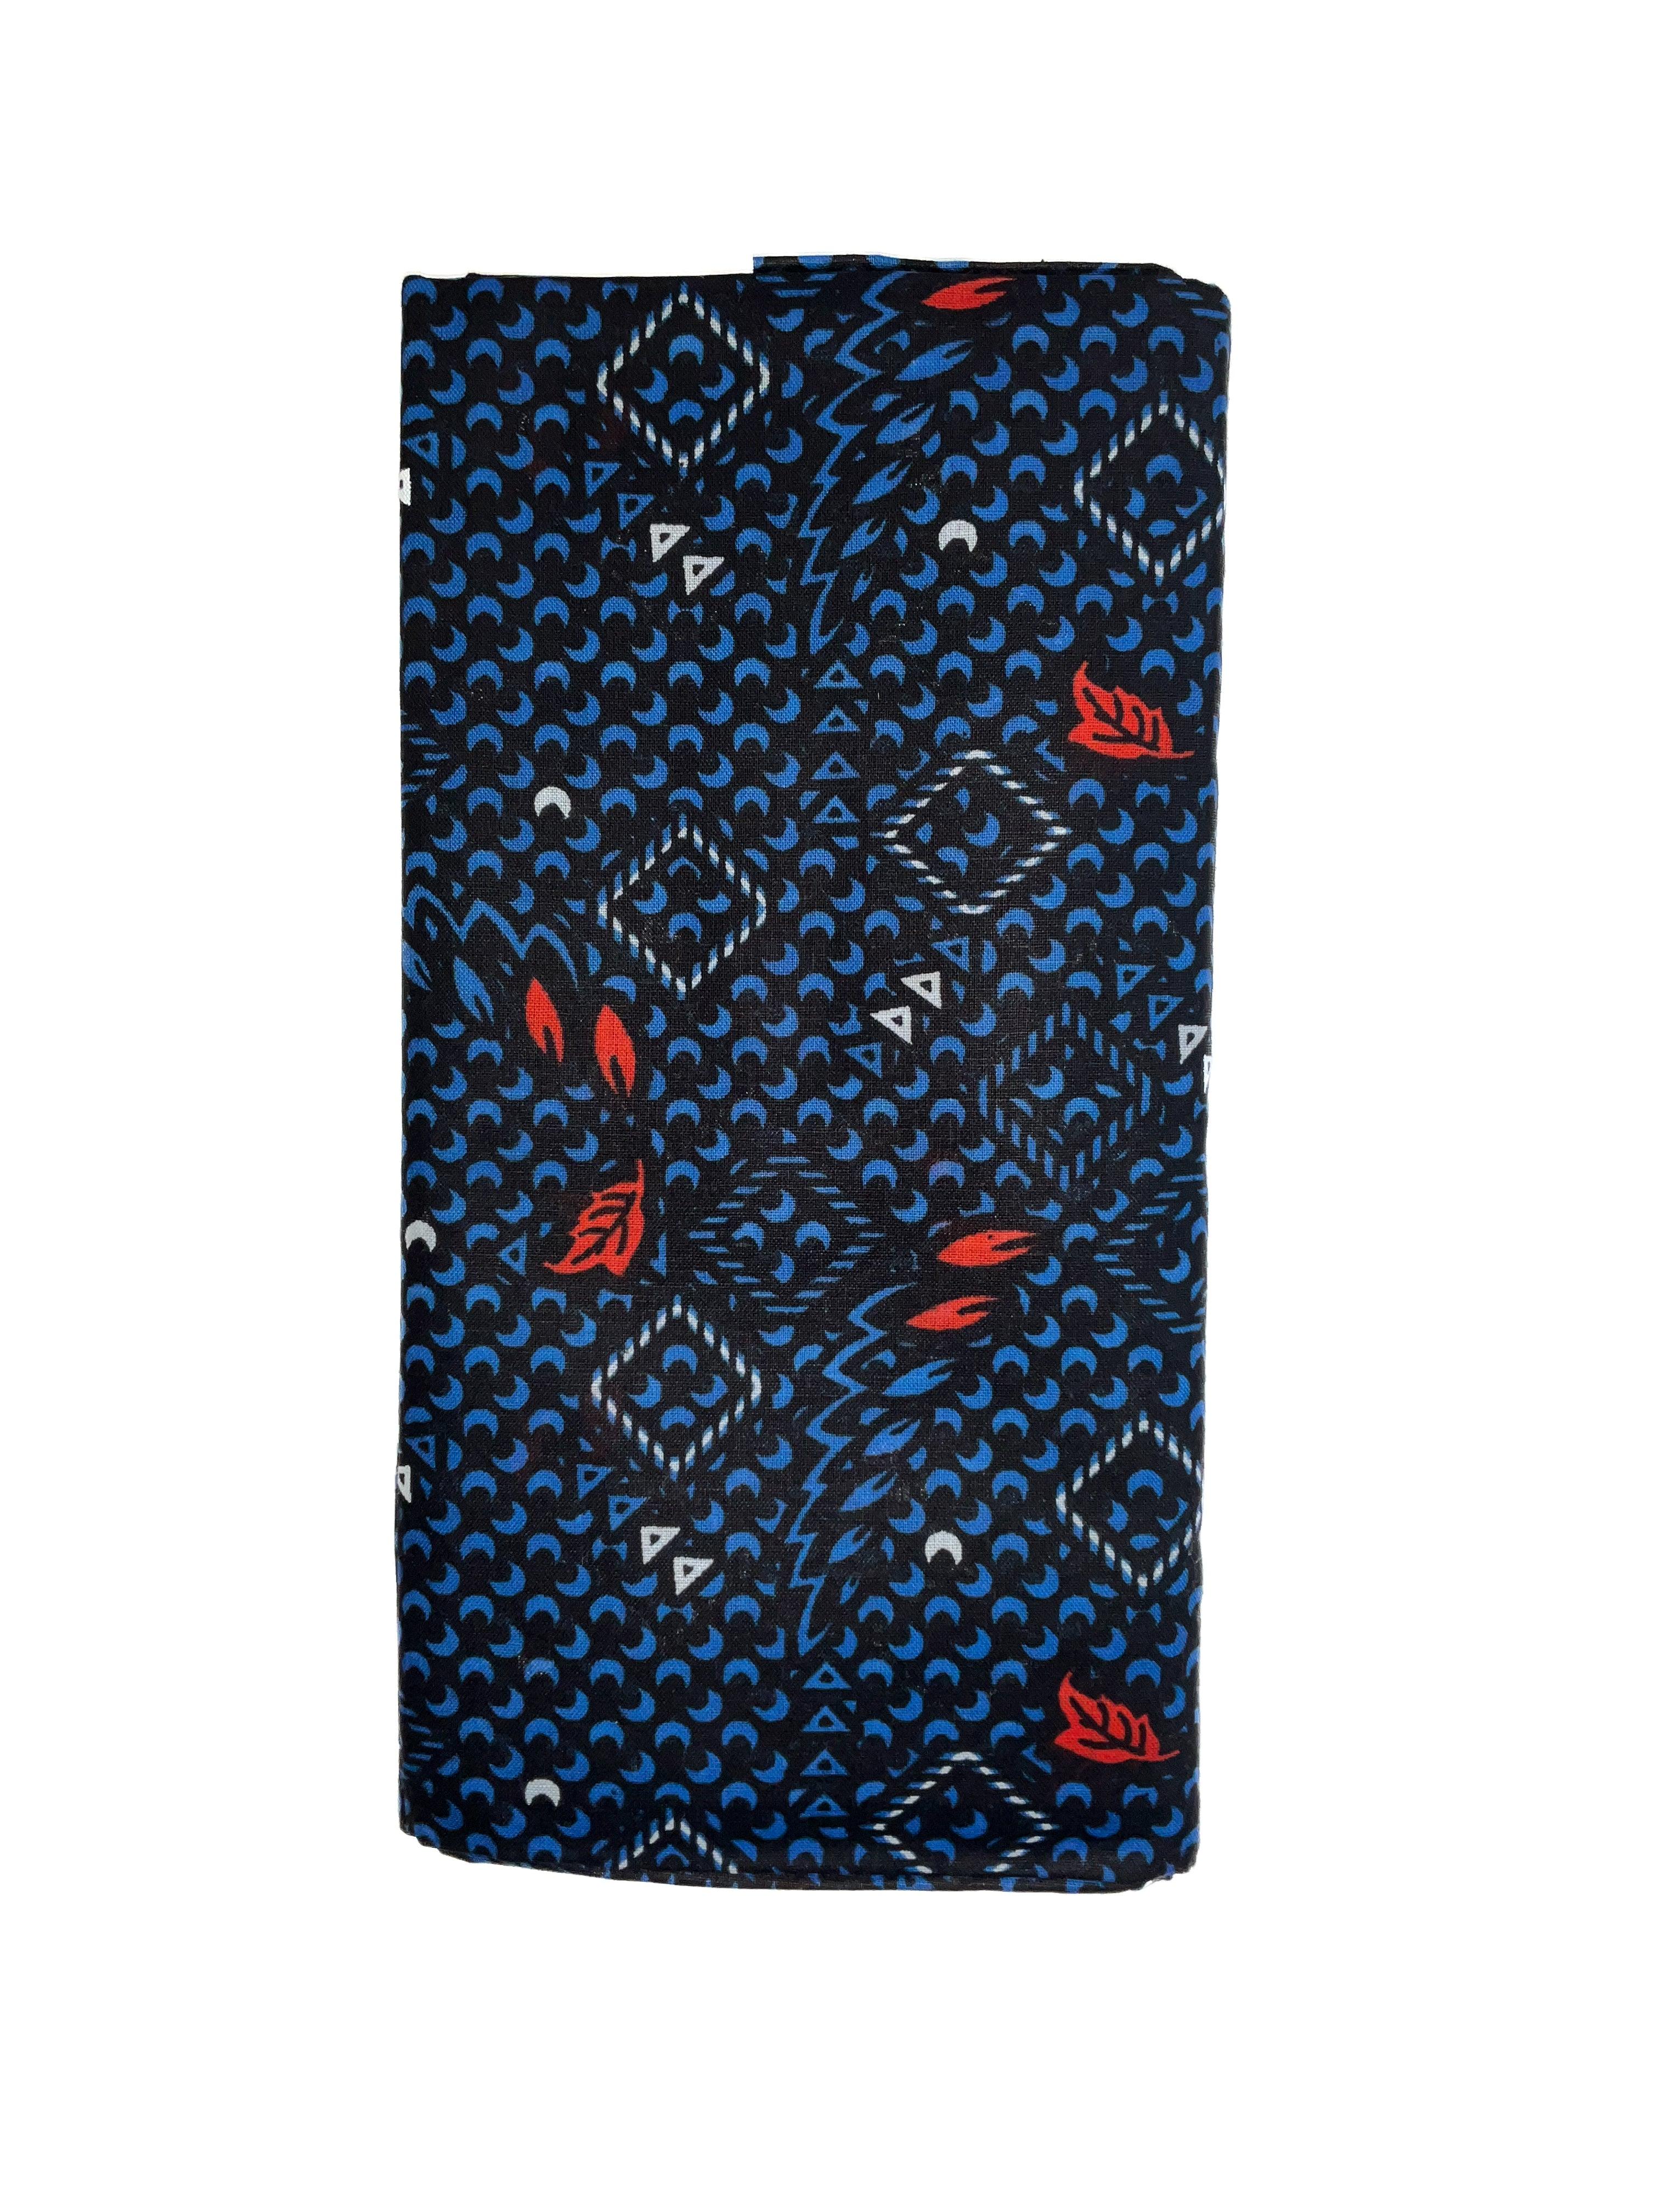 Blue pattern with Red leaves STAR Men’s 100% Cotton Printed Lungi 2m unstitched - www.indiancart.com.au - Lungi - Lungi - Indian Cart